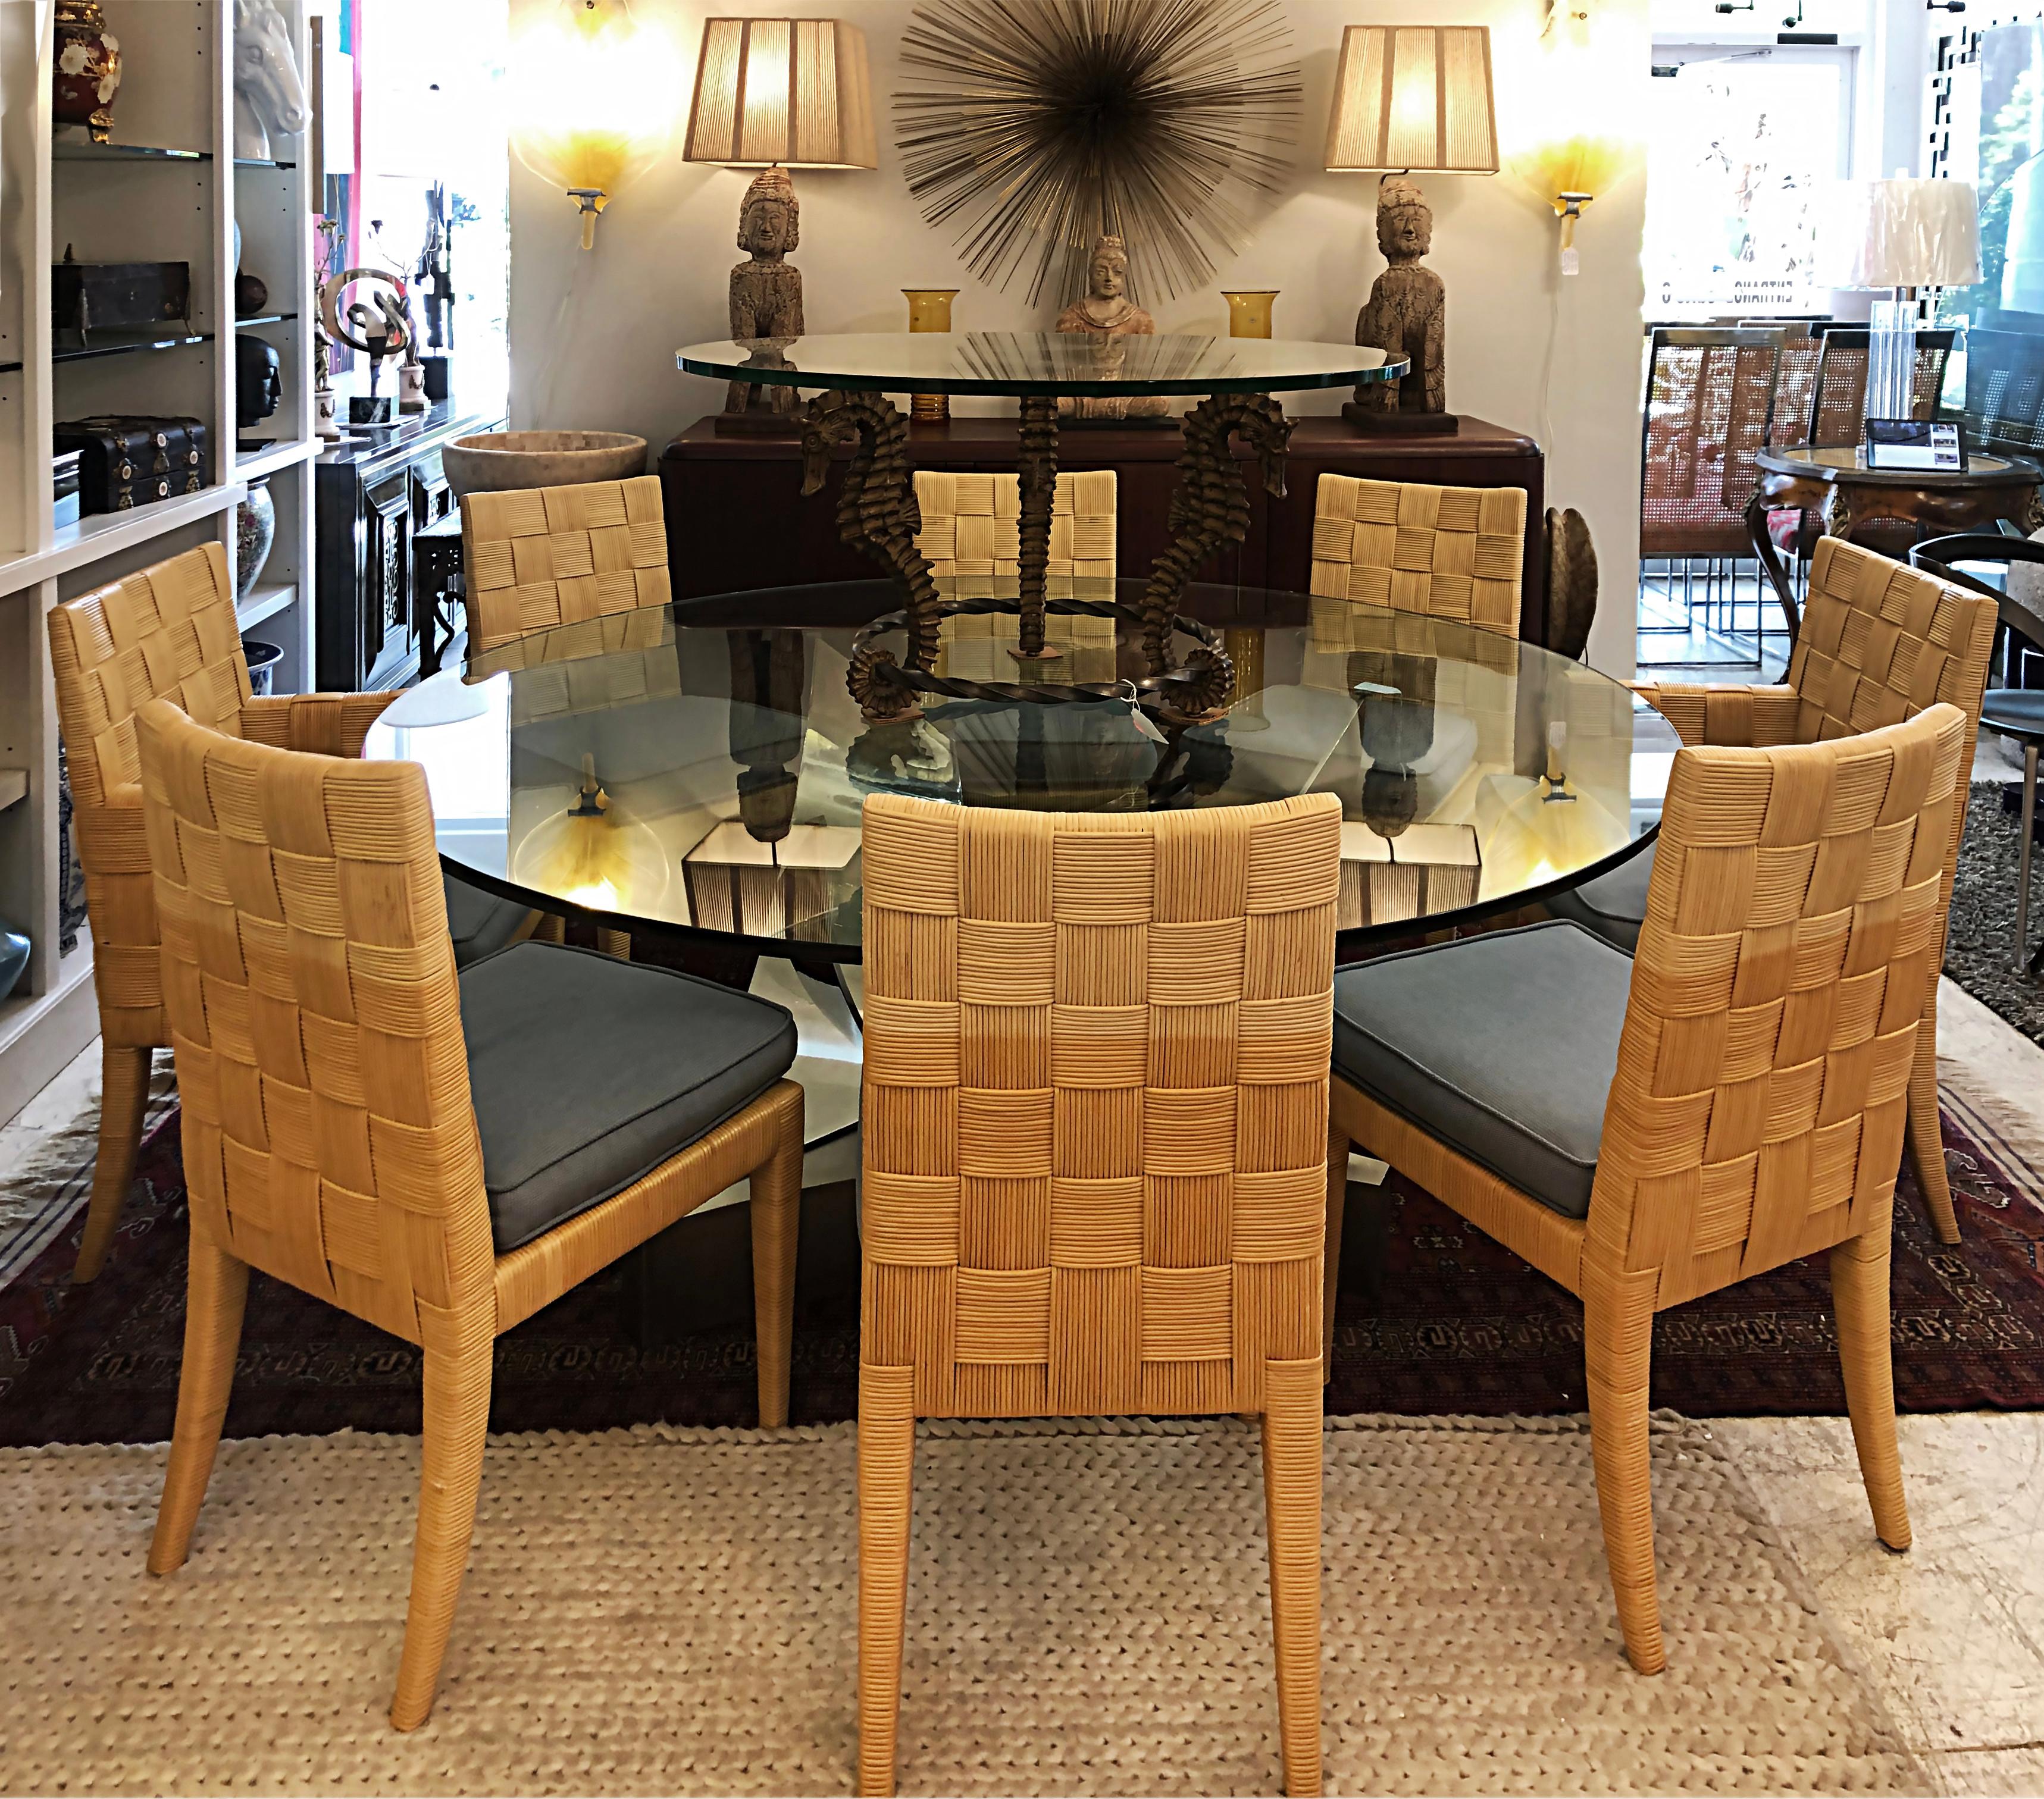 John Hutton Donghia Block Island Rattan dining chairs set, 2 arms, 6 sides
Offered for sale is a wonderful set of eight John Hutton-designed Block Island dining chairs for Donghia. This set of dining chairs is comprised of two armchairs and six